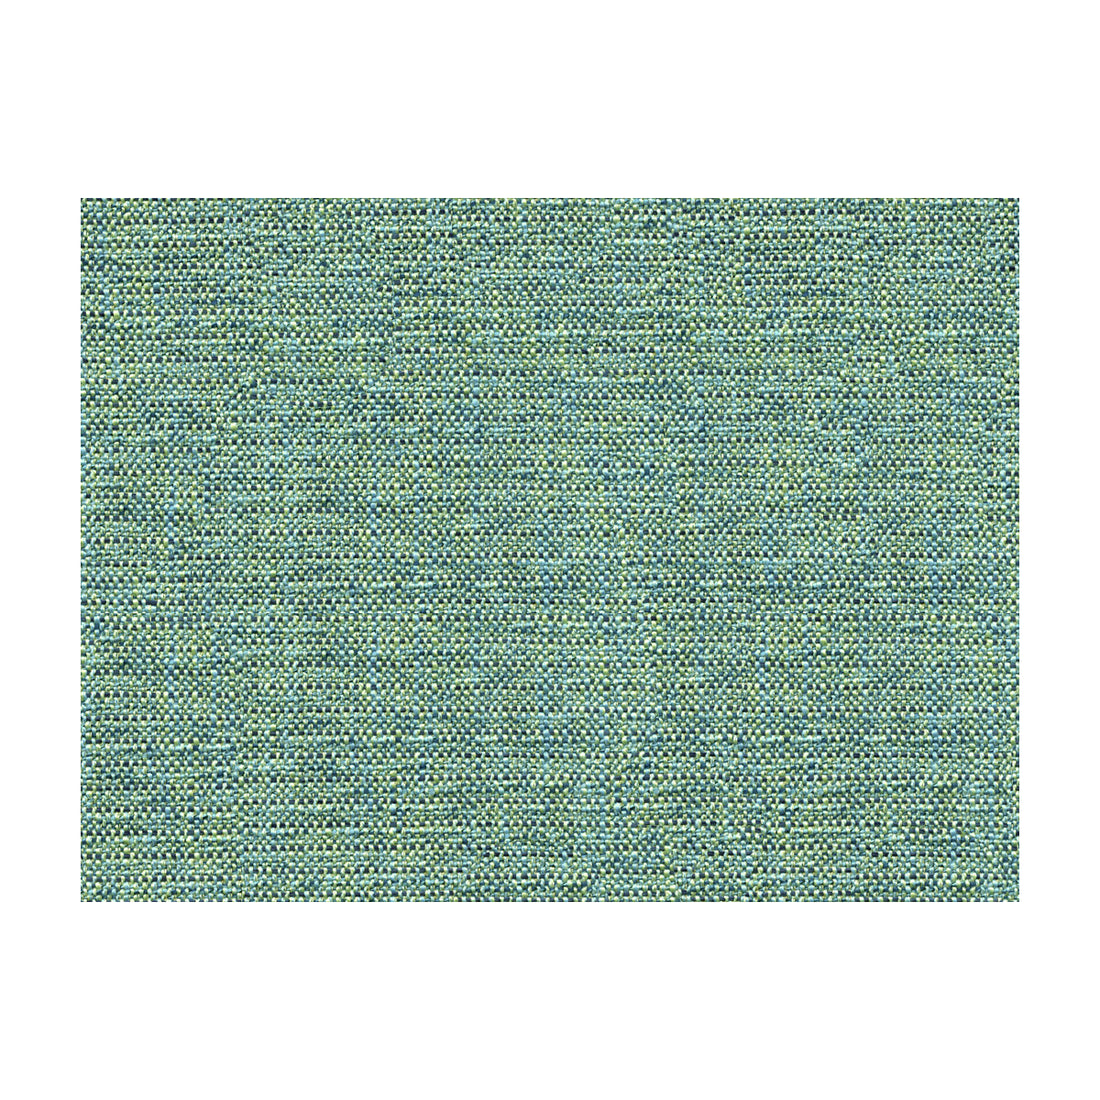 Kravet Basics fabric in 32792-515 color - pattern 32792.515.0 - by Kravet Basics in the Constantinople collection